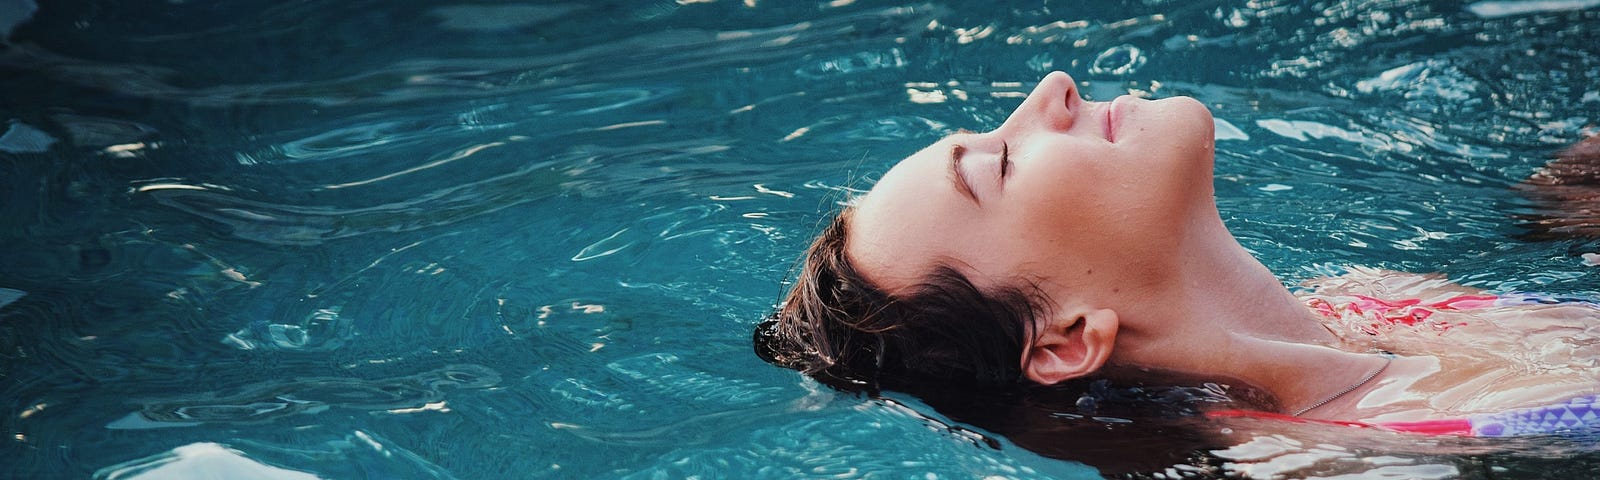 Here is a photo of a young woman floating in a peaceful pool of water, experiencing deep tranquility and rest.